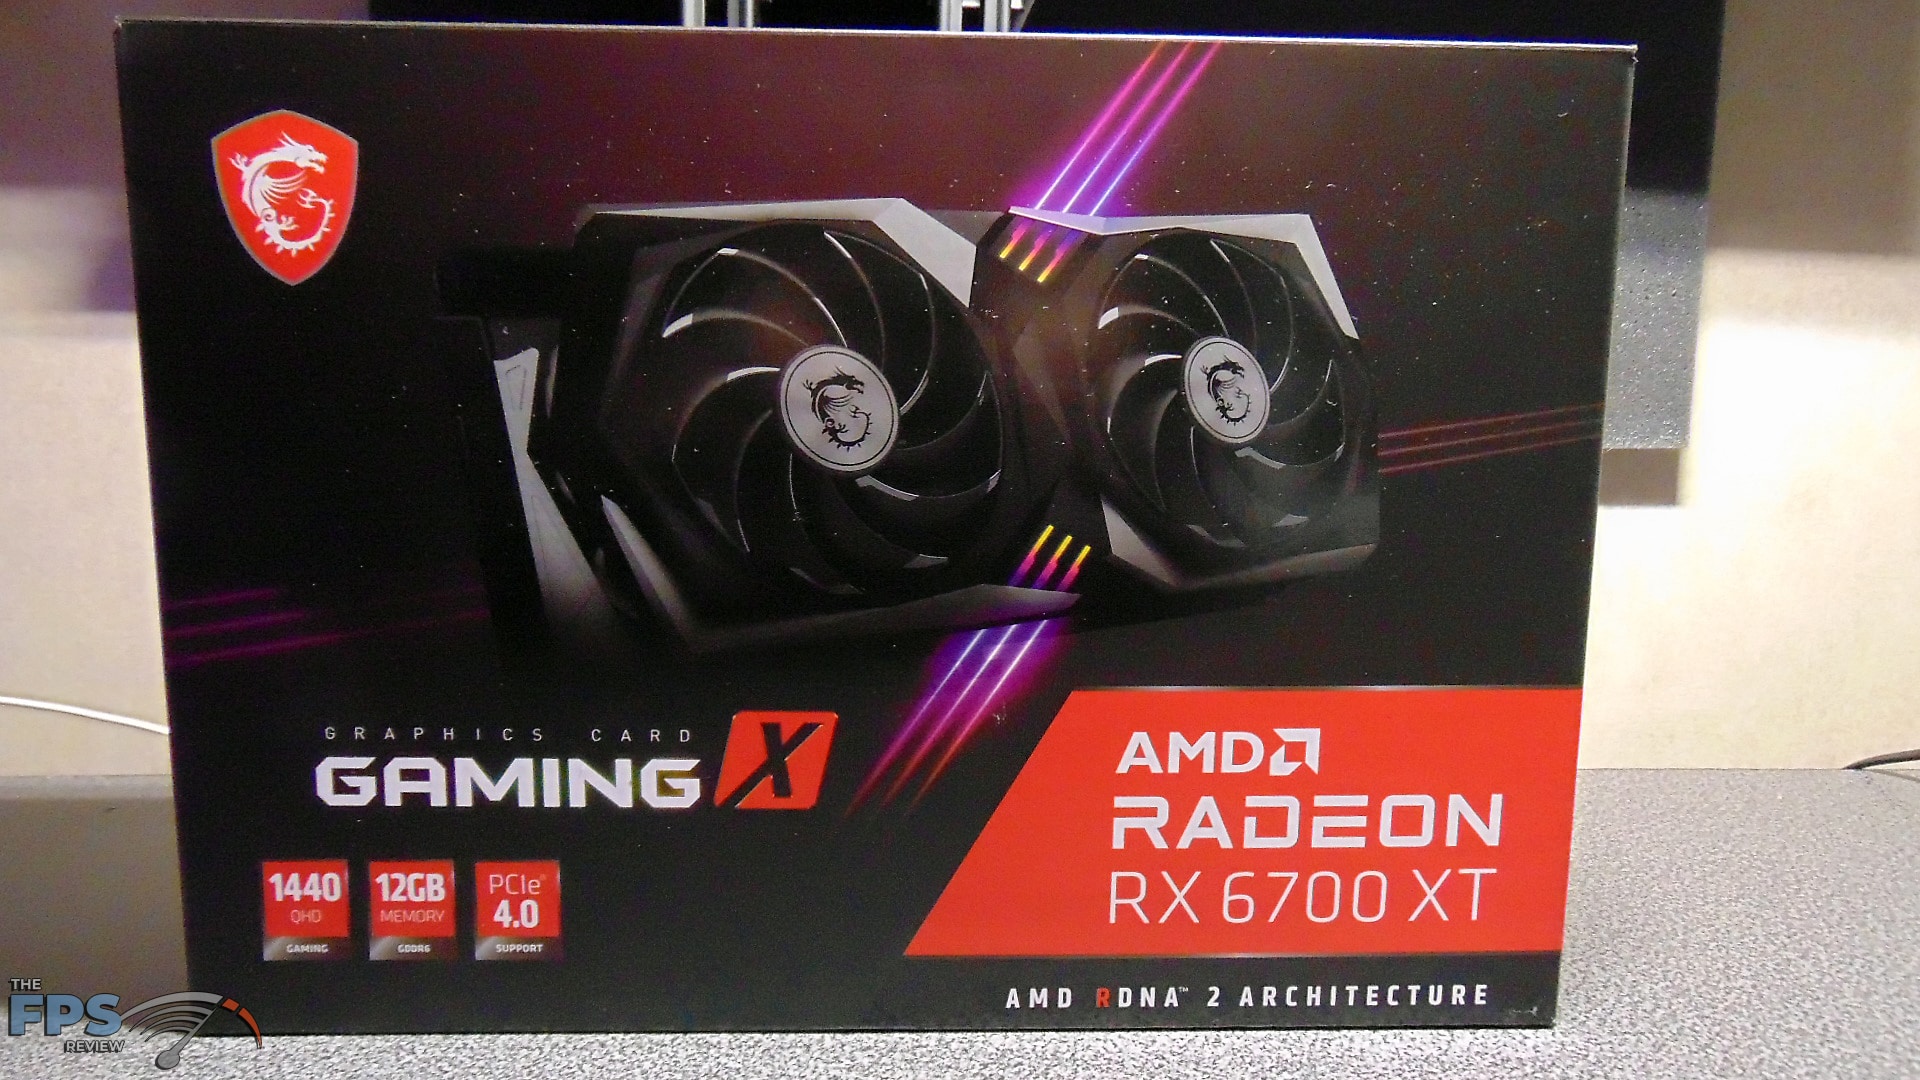 MSI Radeon RX 6700 XT GAMING X Video Card Review - The FPS Review